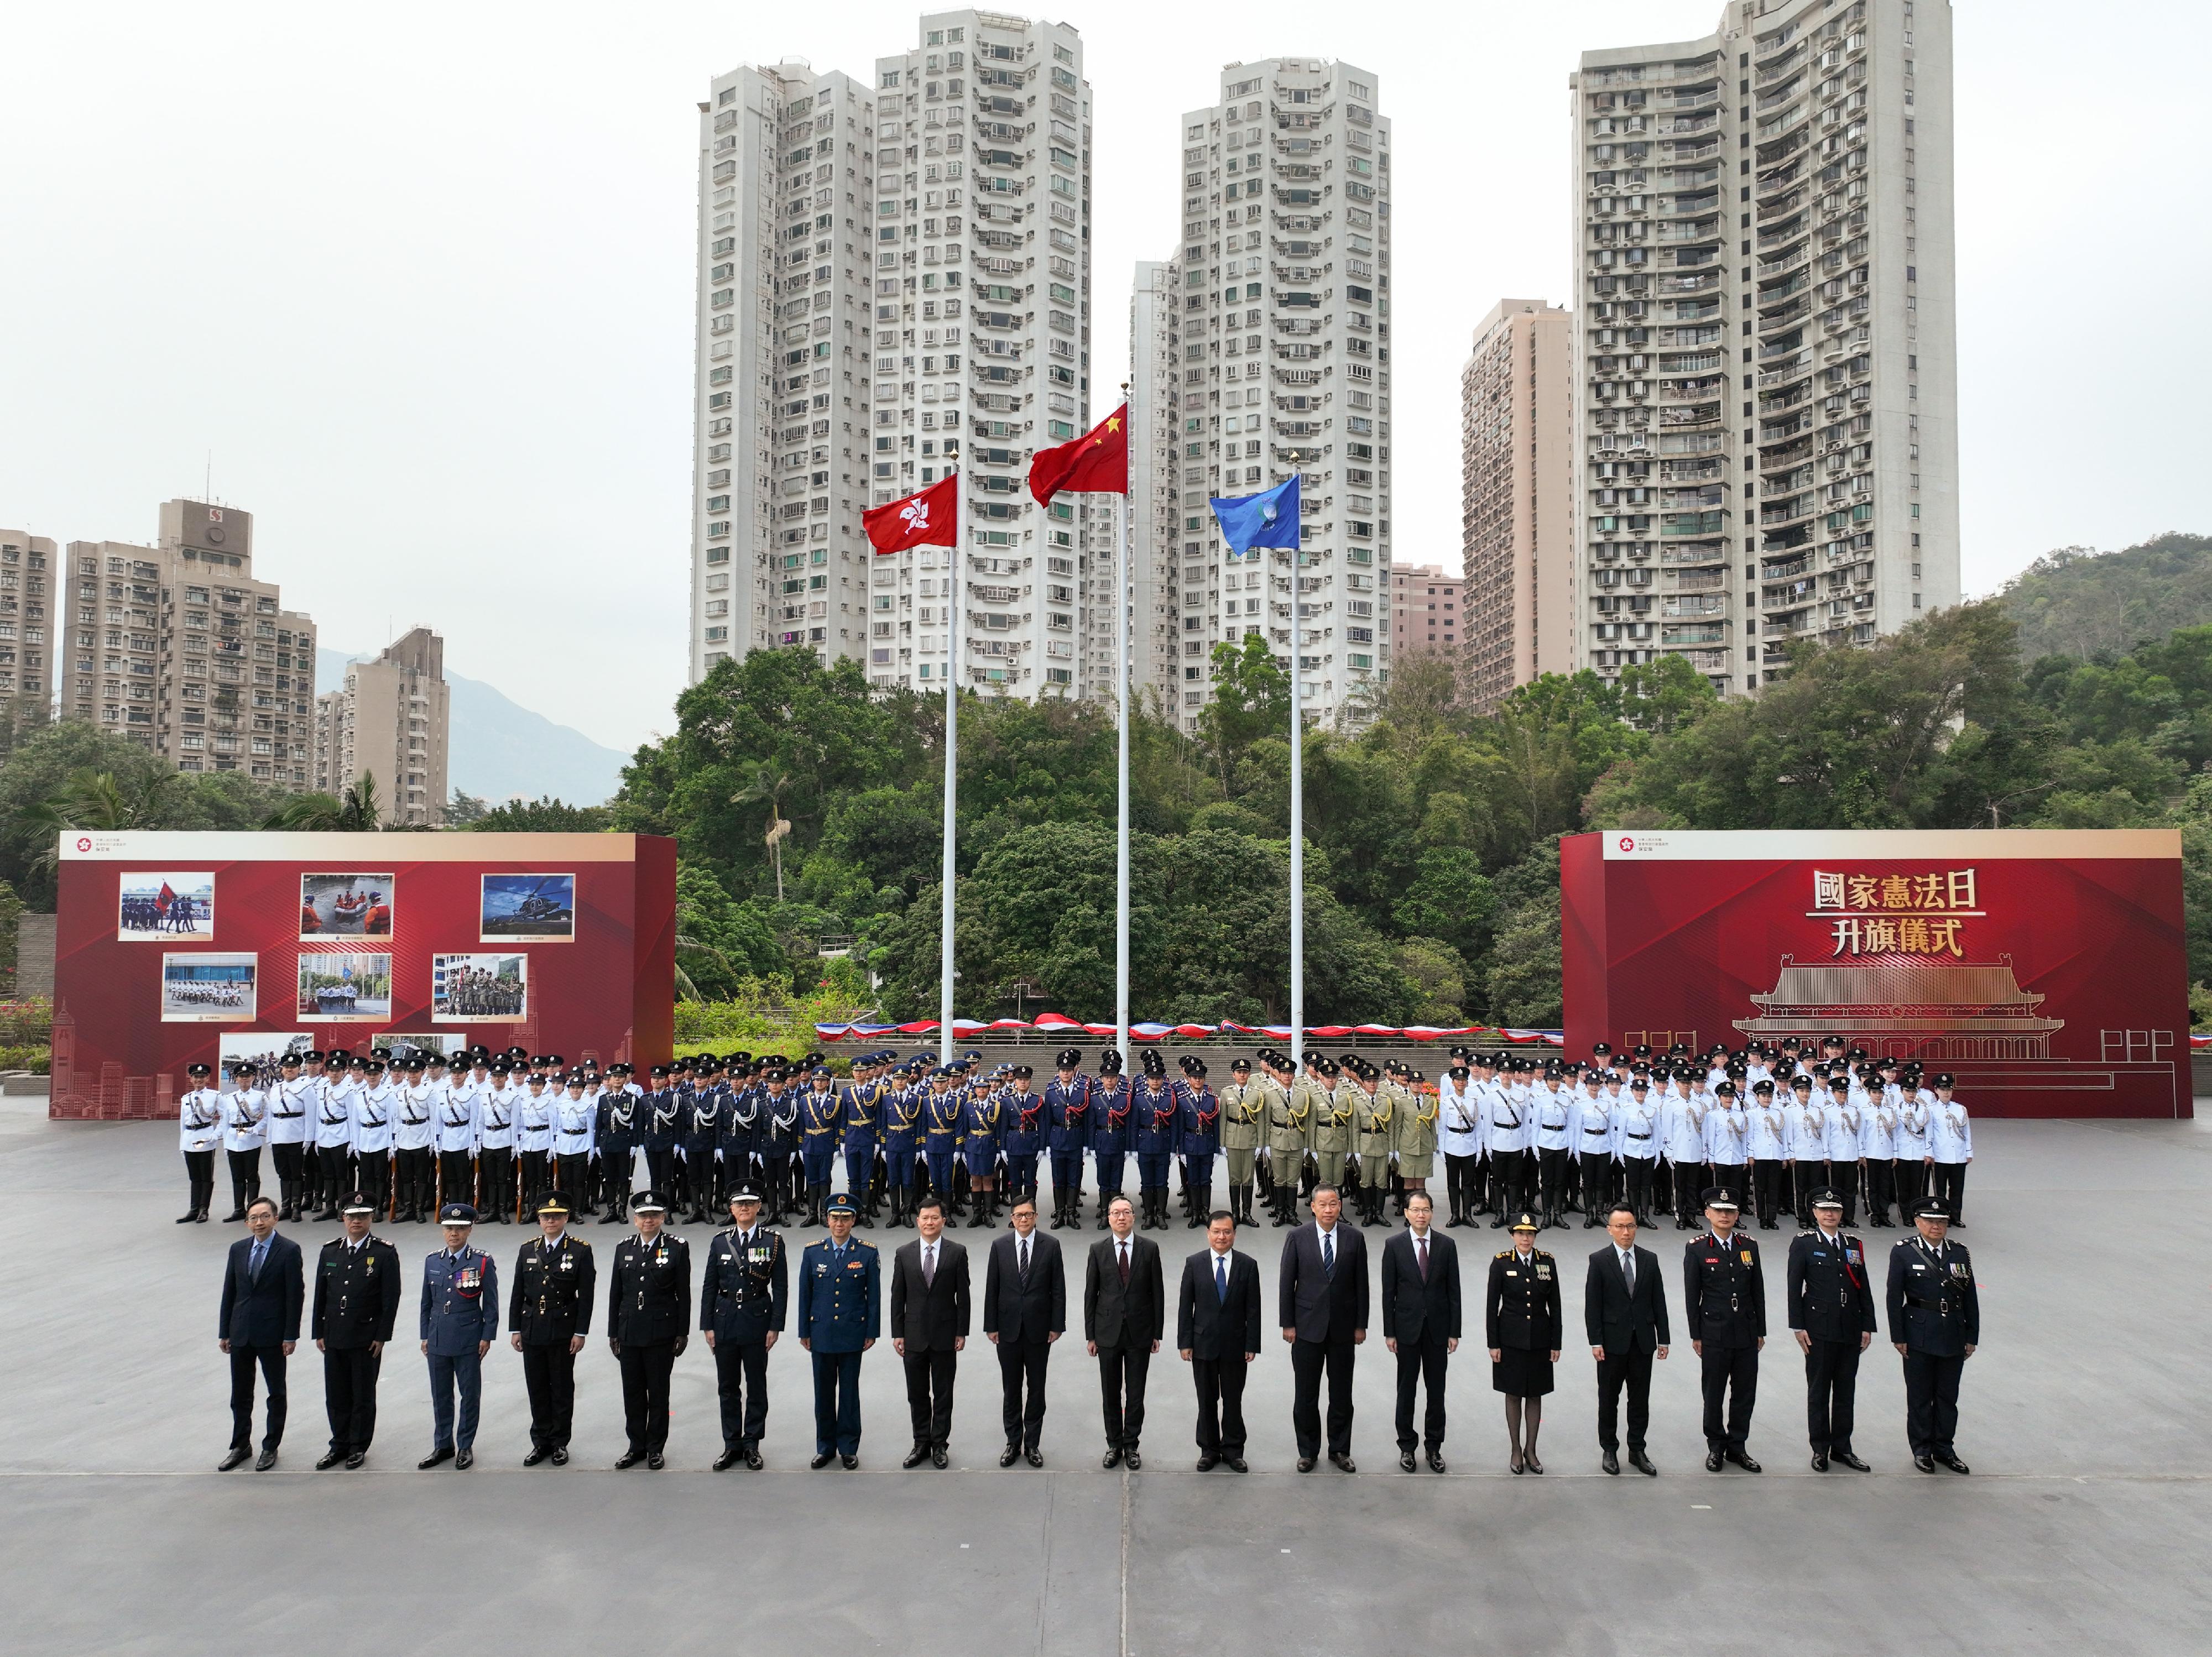 The Security Bureau today (December 4) held the Constitution Day Flag Raising Ceremony. Photo shows (front row, from left) the Deputy Director of Broadcasting, Mr Raymond Sy; the Chief Staff Officer of the Auxiliary Medical Service, Mr Wong Ying-keung; the Controller of the Government Flying Service, Captain West Wu; the Commissioner of Correctional Services, Mr Wong Kwok-hing; the Director of Immigration, Mr Benson Kwok; the Commissioner of Police, Mr Siu Chak-yee; People's Liberation Army Hong Kong Garrison Air Force Senior Colonel Jiang Junde; the Director-General of the Police Liaison Department of the Liaison Office of the Central People's Government in the Hong Kong Special Administrative Region (HKSAR), Mr Chen Feng; the Secretary for Security, Mr Tang Ping-keung; the Secretary for Justice, Mr Paul Lam, SC; Deputy Commissioner of the Office of the Commissioner of the Ministry of Foreign Affairs of the People's Republic of China in the HKSAR Mr Fang Jianming; the Director of the liaison office of the Office for Safeguarding National Security of the Central People's Government in the HKSAR, Mr Deng Jianwei; the Secretary General of the Committee for Safeguarding National Security of the HKSAR, Mr Sonny Au; the Commissioner of Customs and Excise, Ms Louise Ho; the Permanent Secretary for Security, Mr Patrick Li; the Director of Fire Services, Mr Andy Yeung; the Commissioner of the Civil Aid Service, Mr Lo Yan-lai; and the Commandant of the Hong Kong Auxiliary Police Force, Mr Yang Joe-tsi.